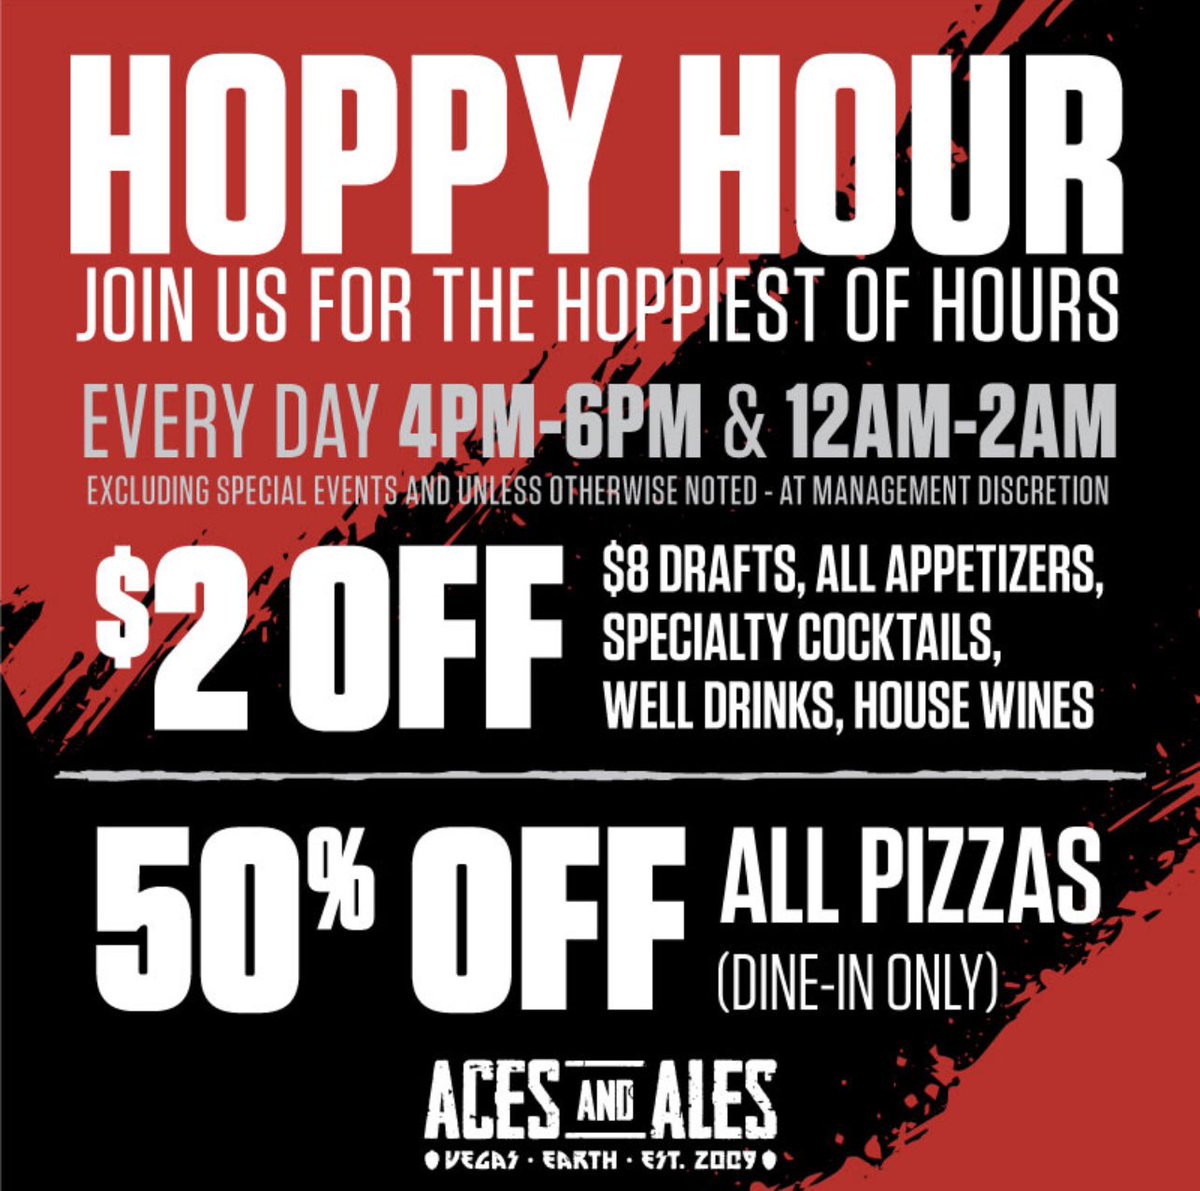 🍺🍕Start the #weekend off right!! 

Join us EVERYDAY for Hoppy Hour! 🤘

✅ 4pm to 6pm
✅ 12am to 2am

#hoppyhour #happyhour #happyhourlasvegas #happyhourvegas #lasvegashappyhour #vegashappyhour #acesandales #acesandalestenaya #acesandalesnellis #lasvegas #lasvegascraftbeer